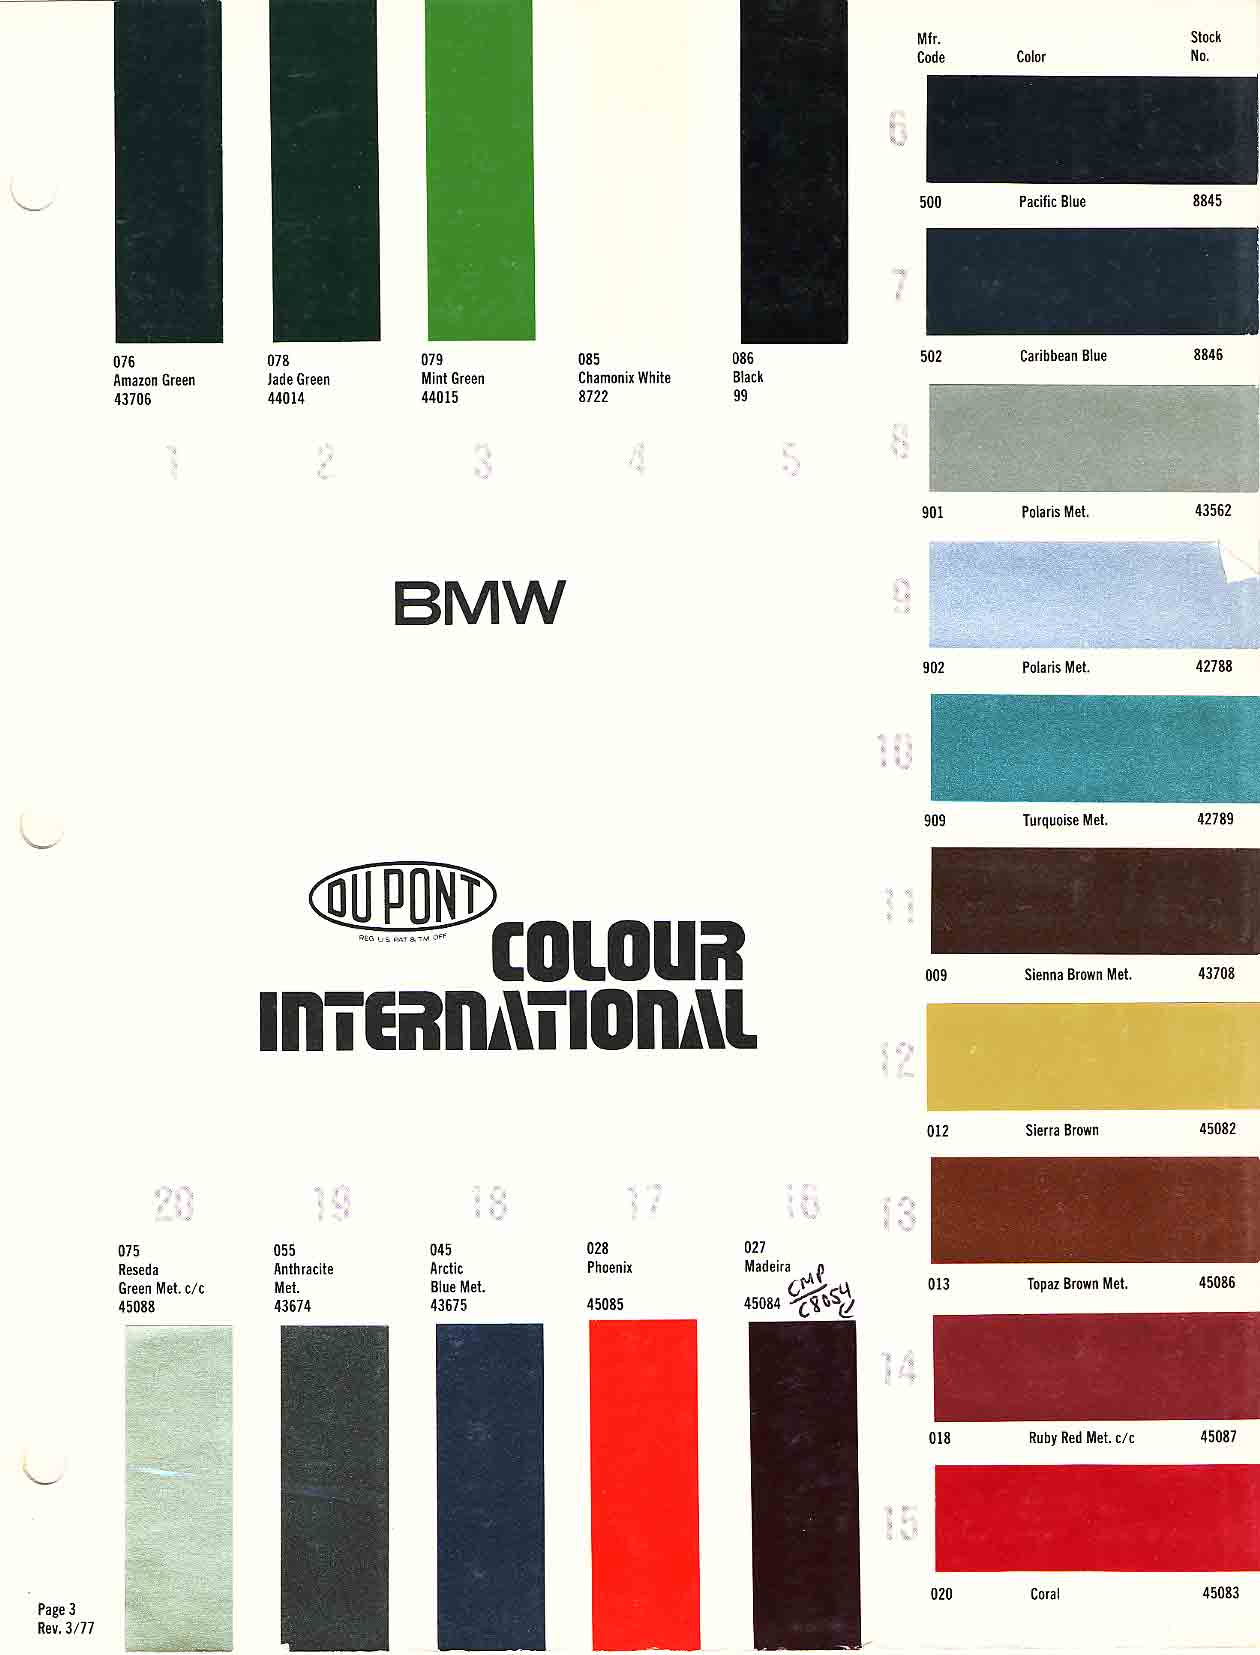 exterior paint colors and their ordering codes for the BMW models